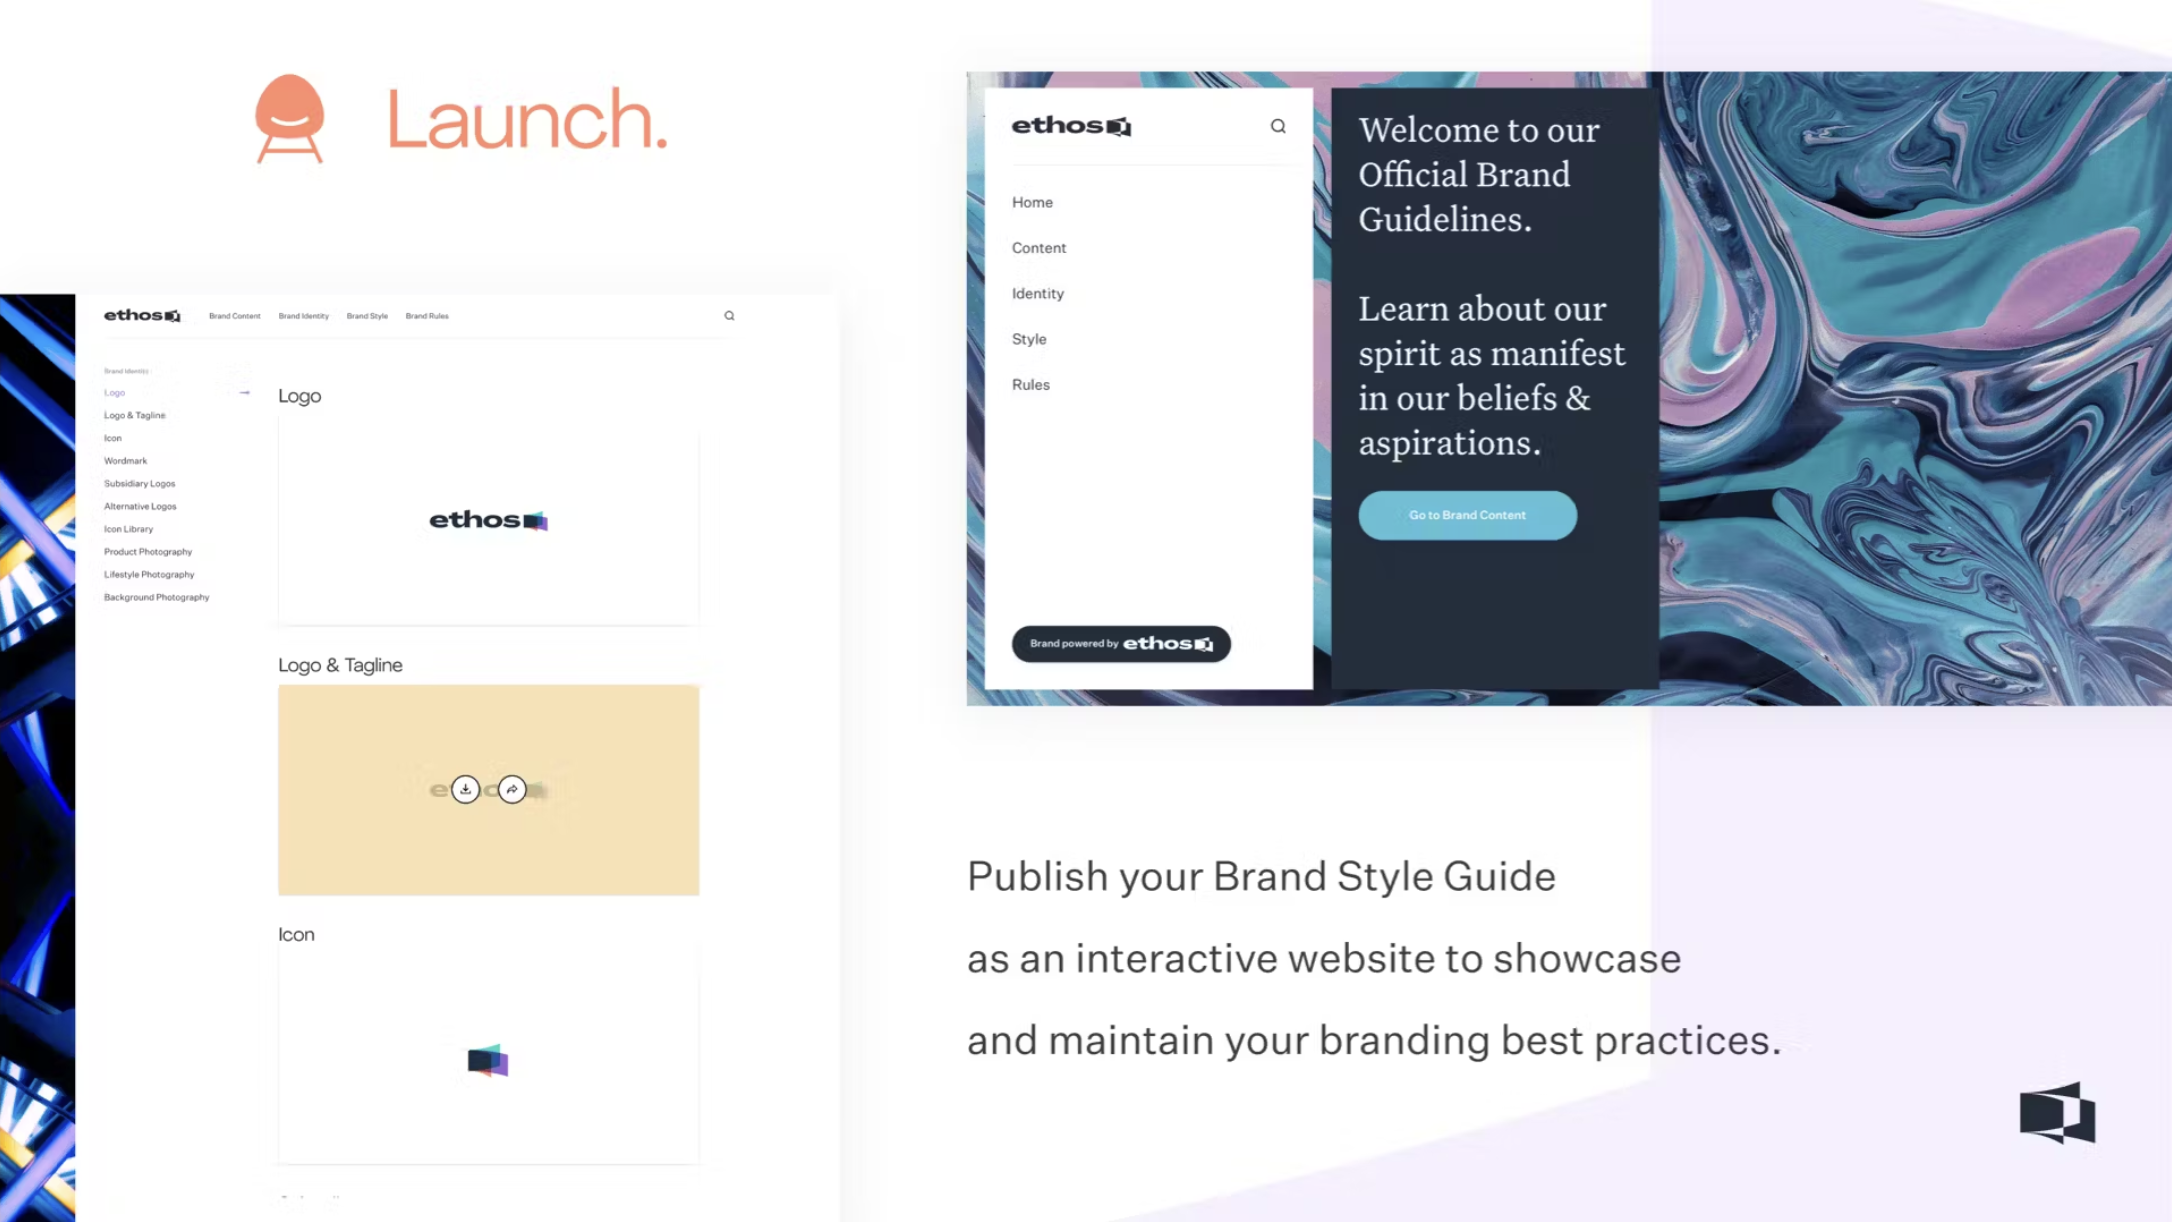 Launch Your Brand Guideline: Publish your Brand Style Guide as an interactive website to showcase and maintain your branding best practices.